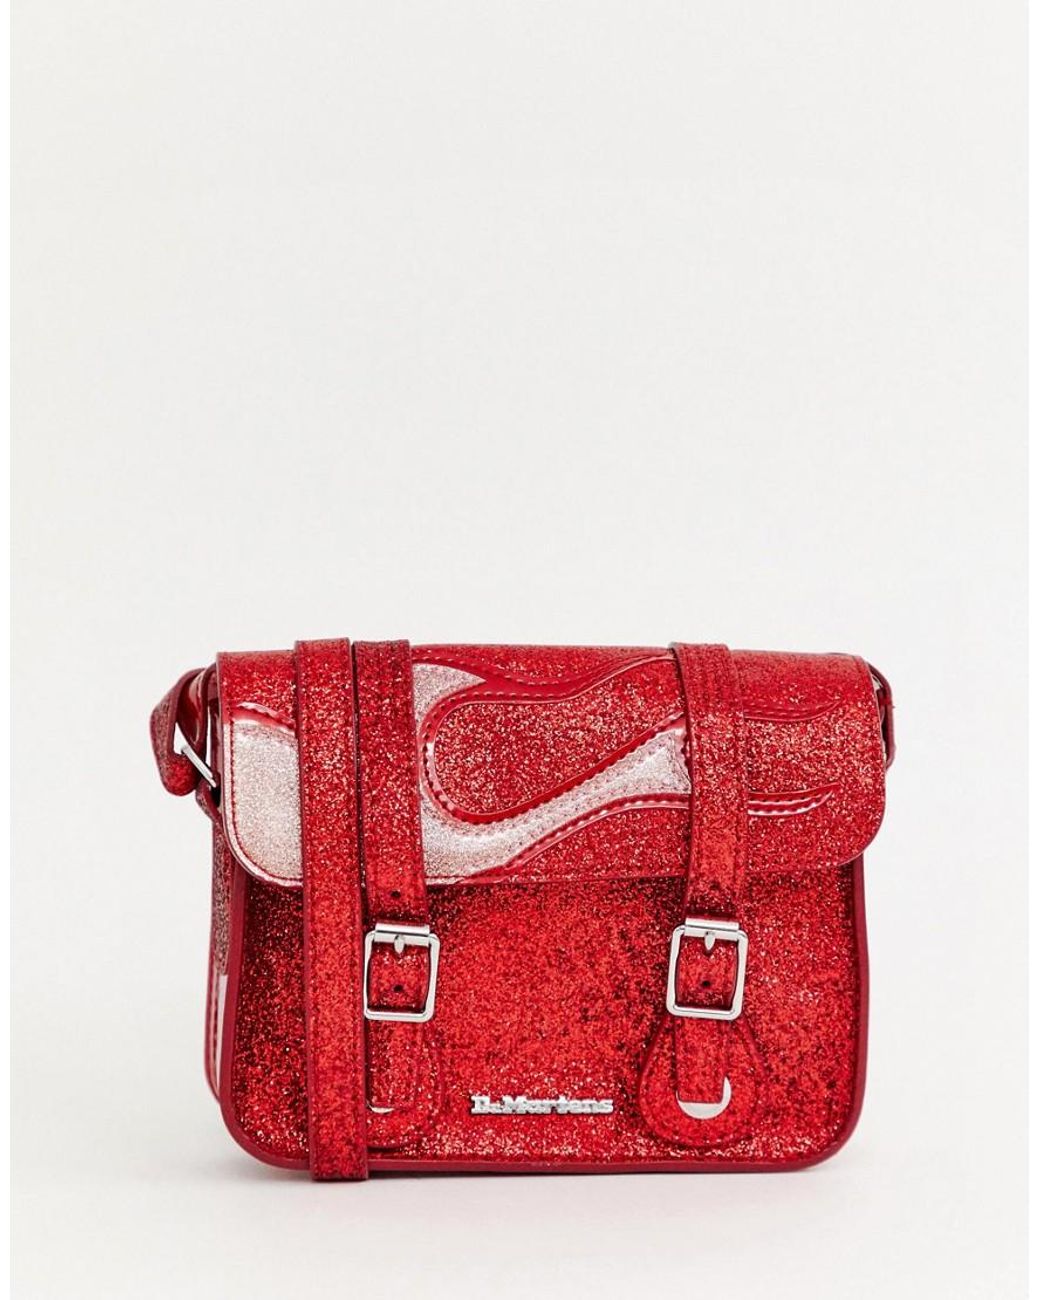 Dr. Martens Red Glitter Flame 7inch Satchel | Lyst